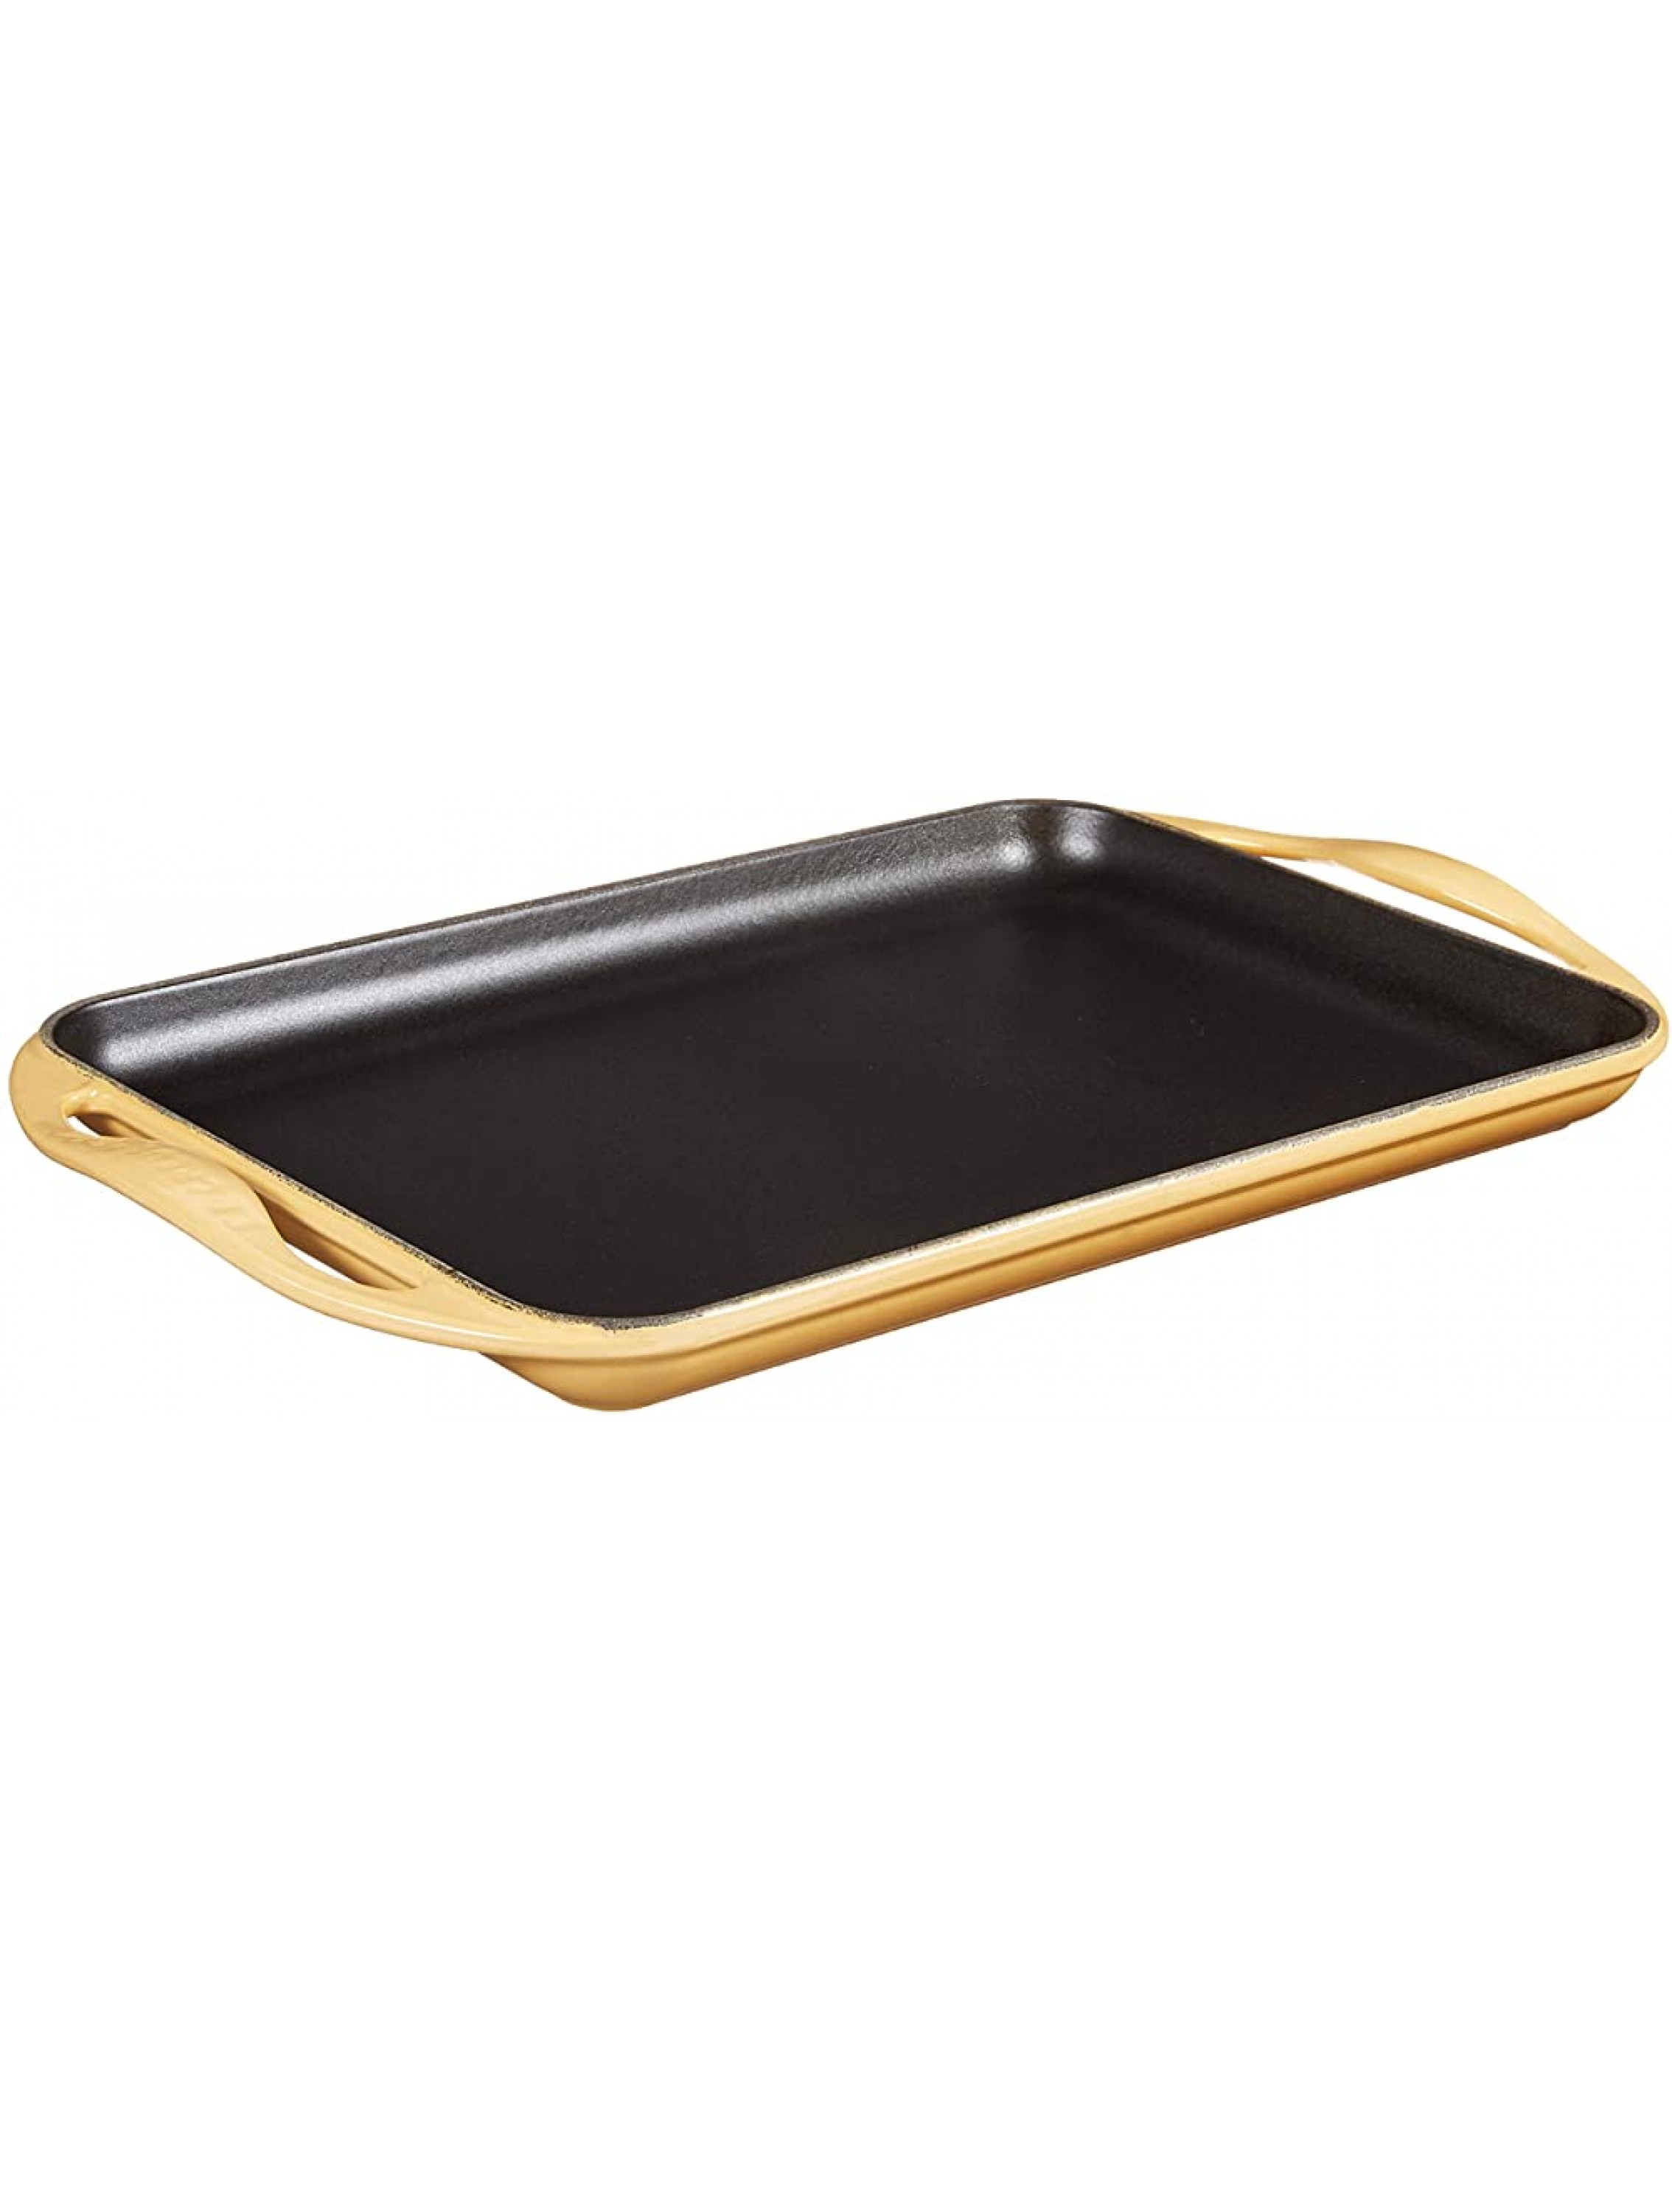 Le Creuset Enameled Cast Iron Rectangular Skinny Griddle 13 x 8.5 Quince - B48D0G7BE